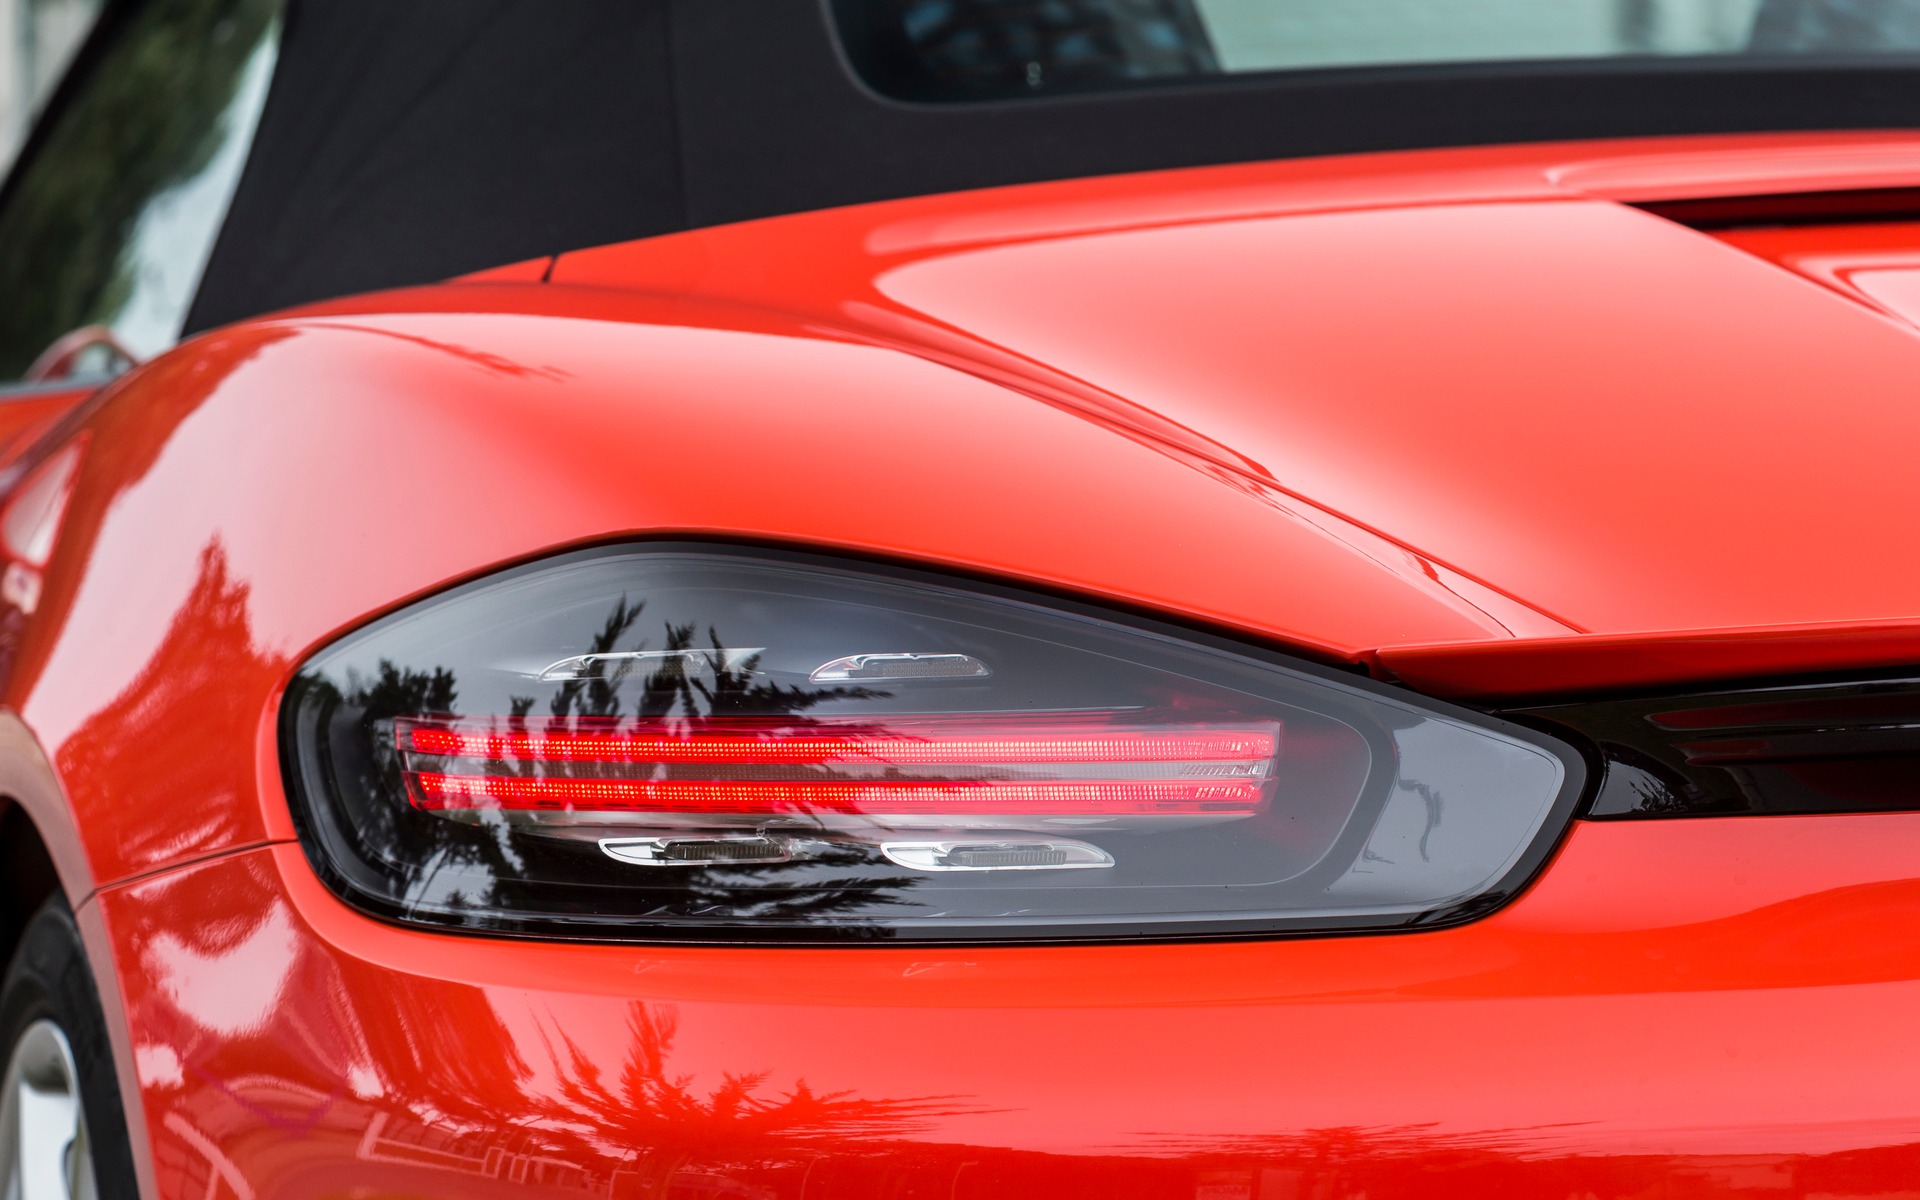 The three-dimensional look of the taillights.